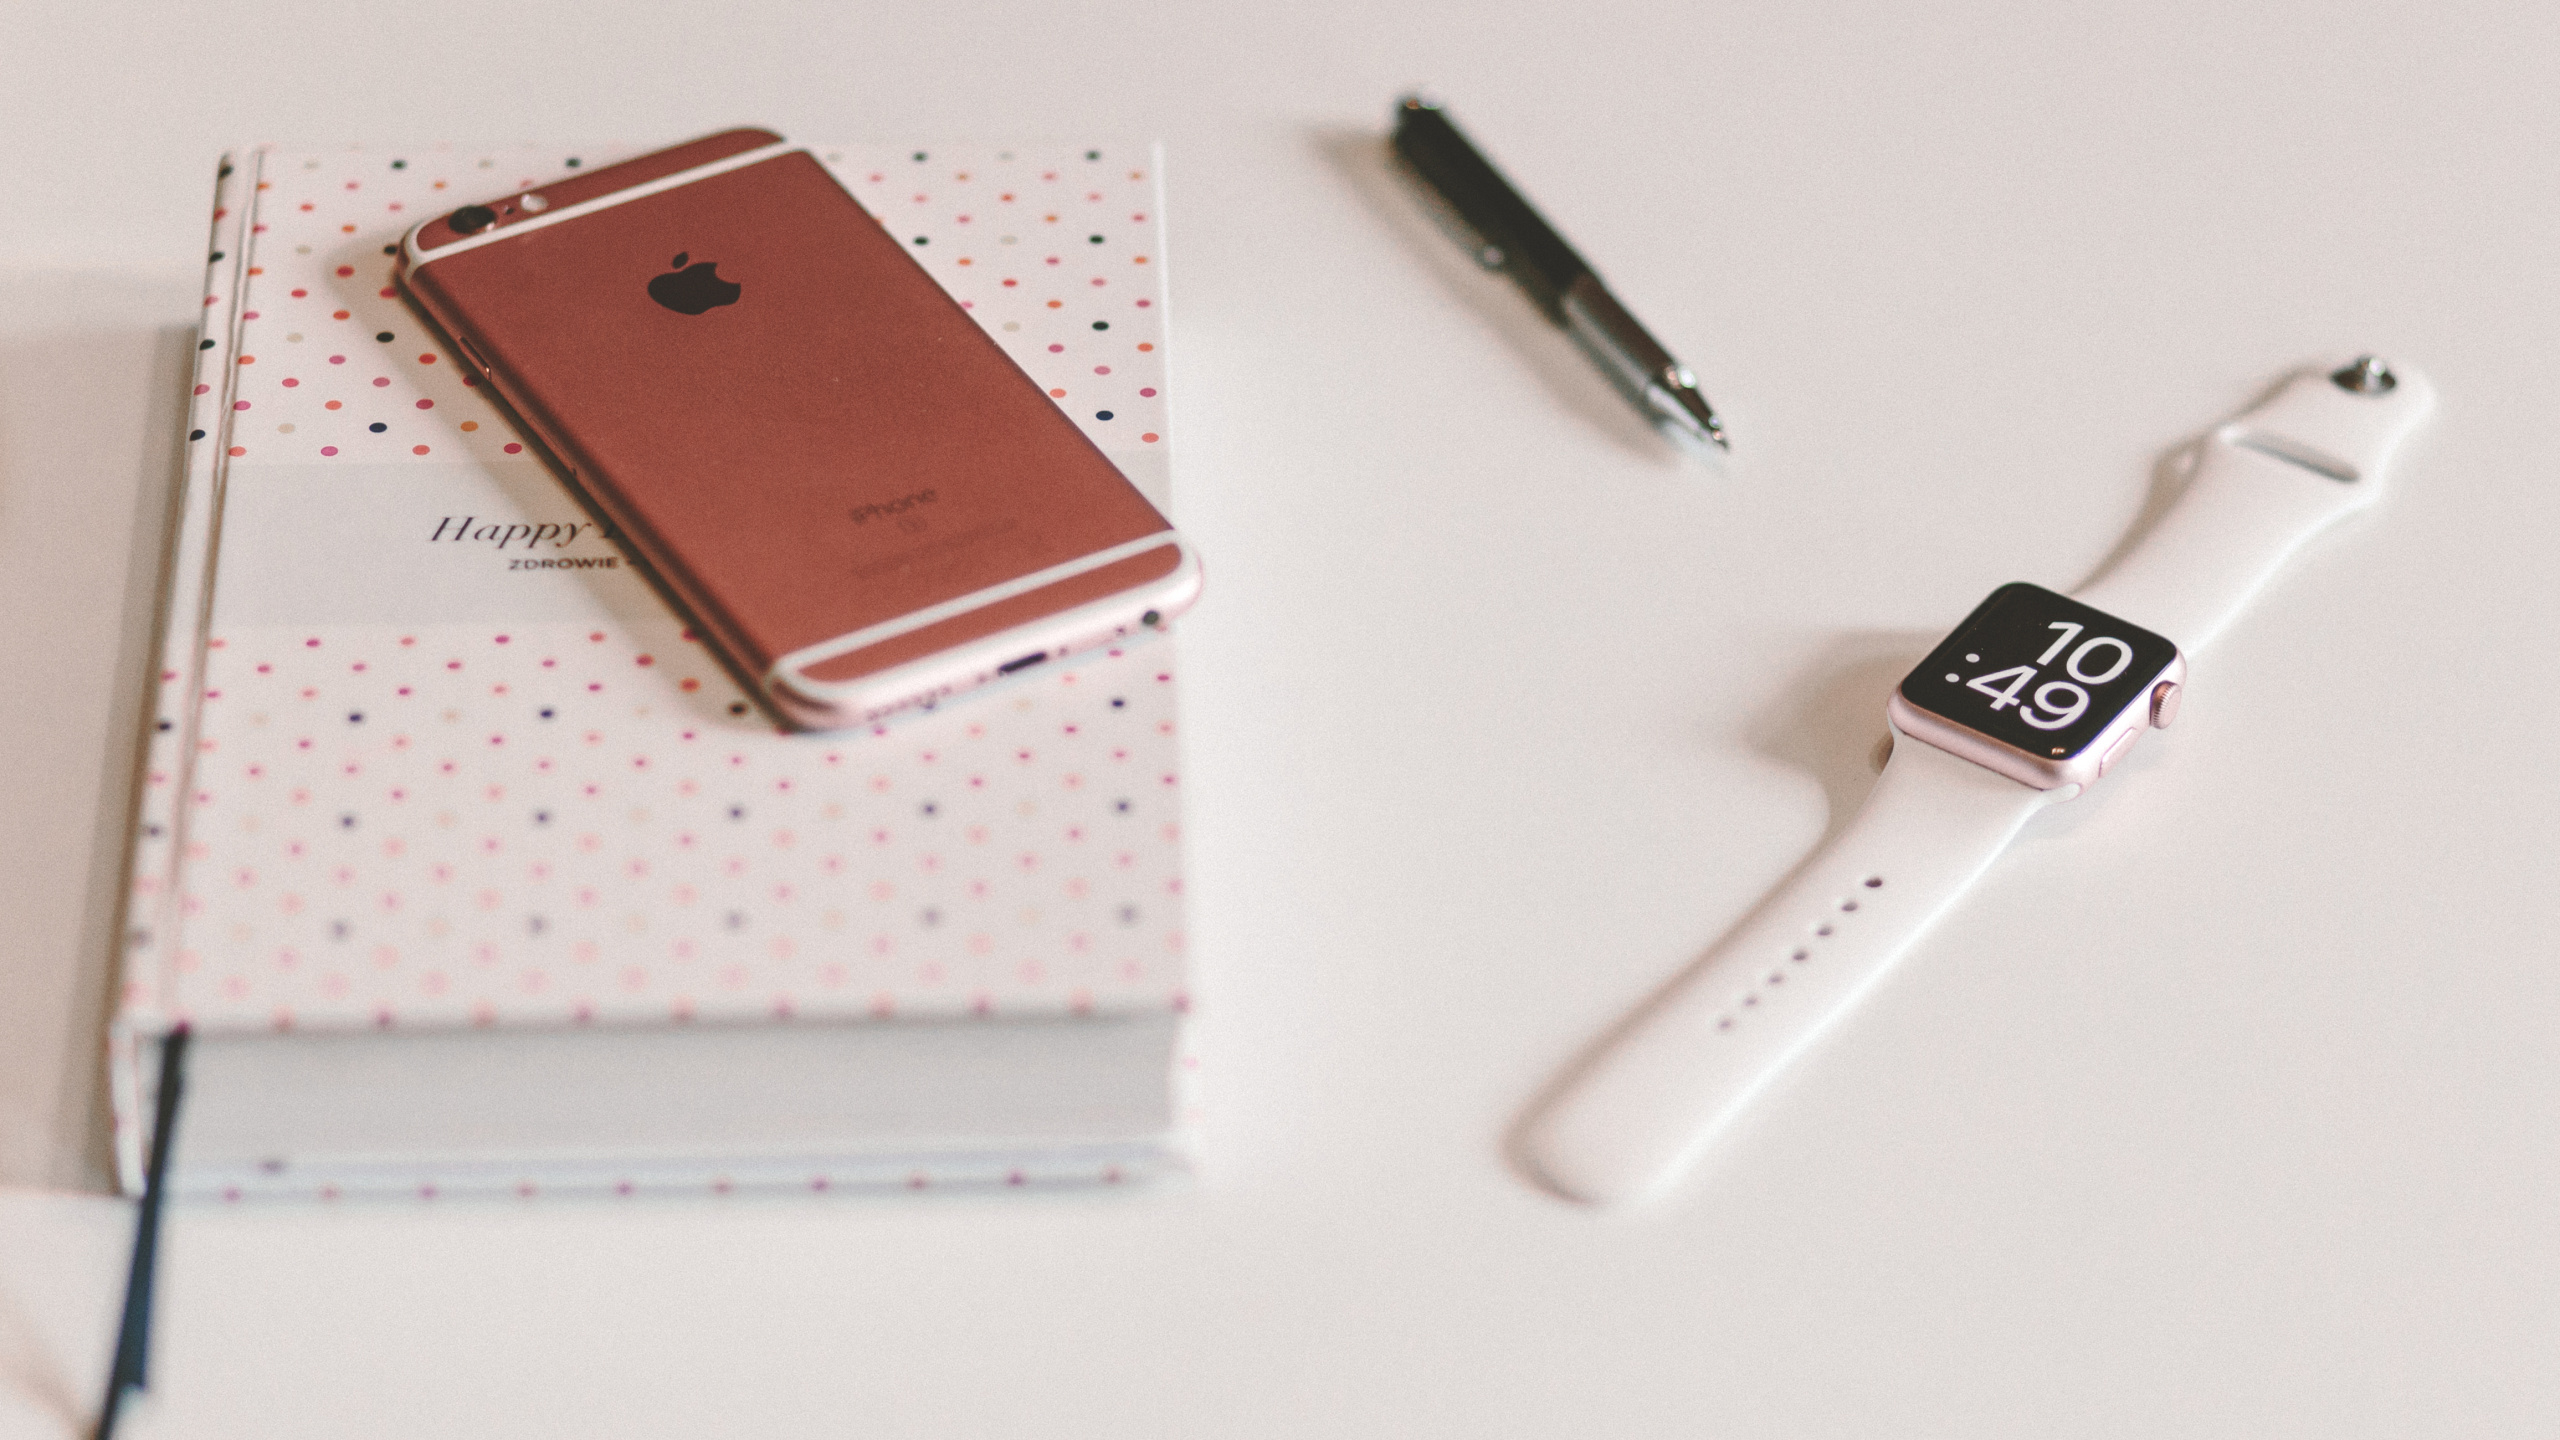 Silver Apple Watch With White Sport Band Beside Black Click Pen. Wallpaper in 2560x1440 Resolution